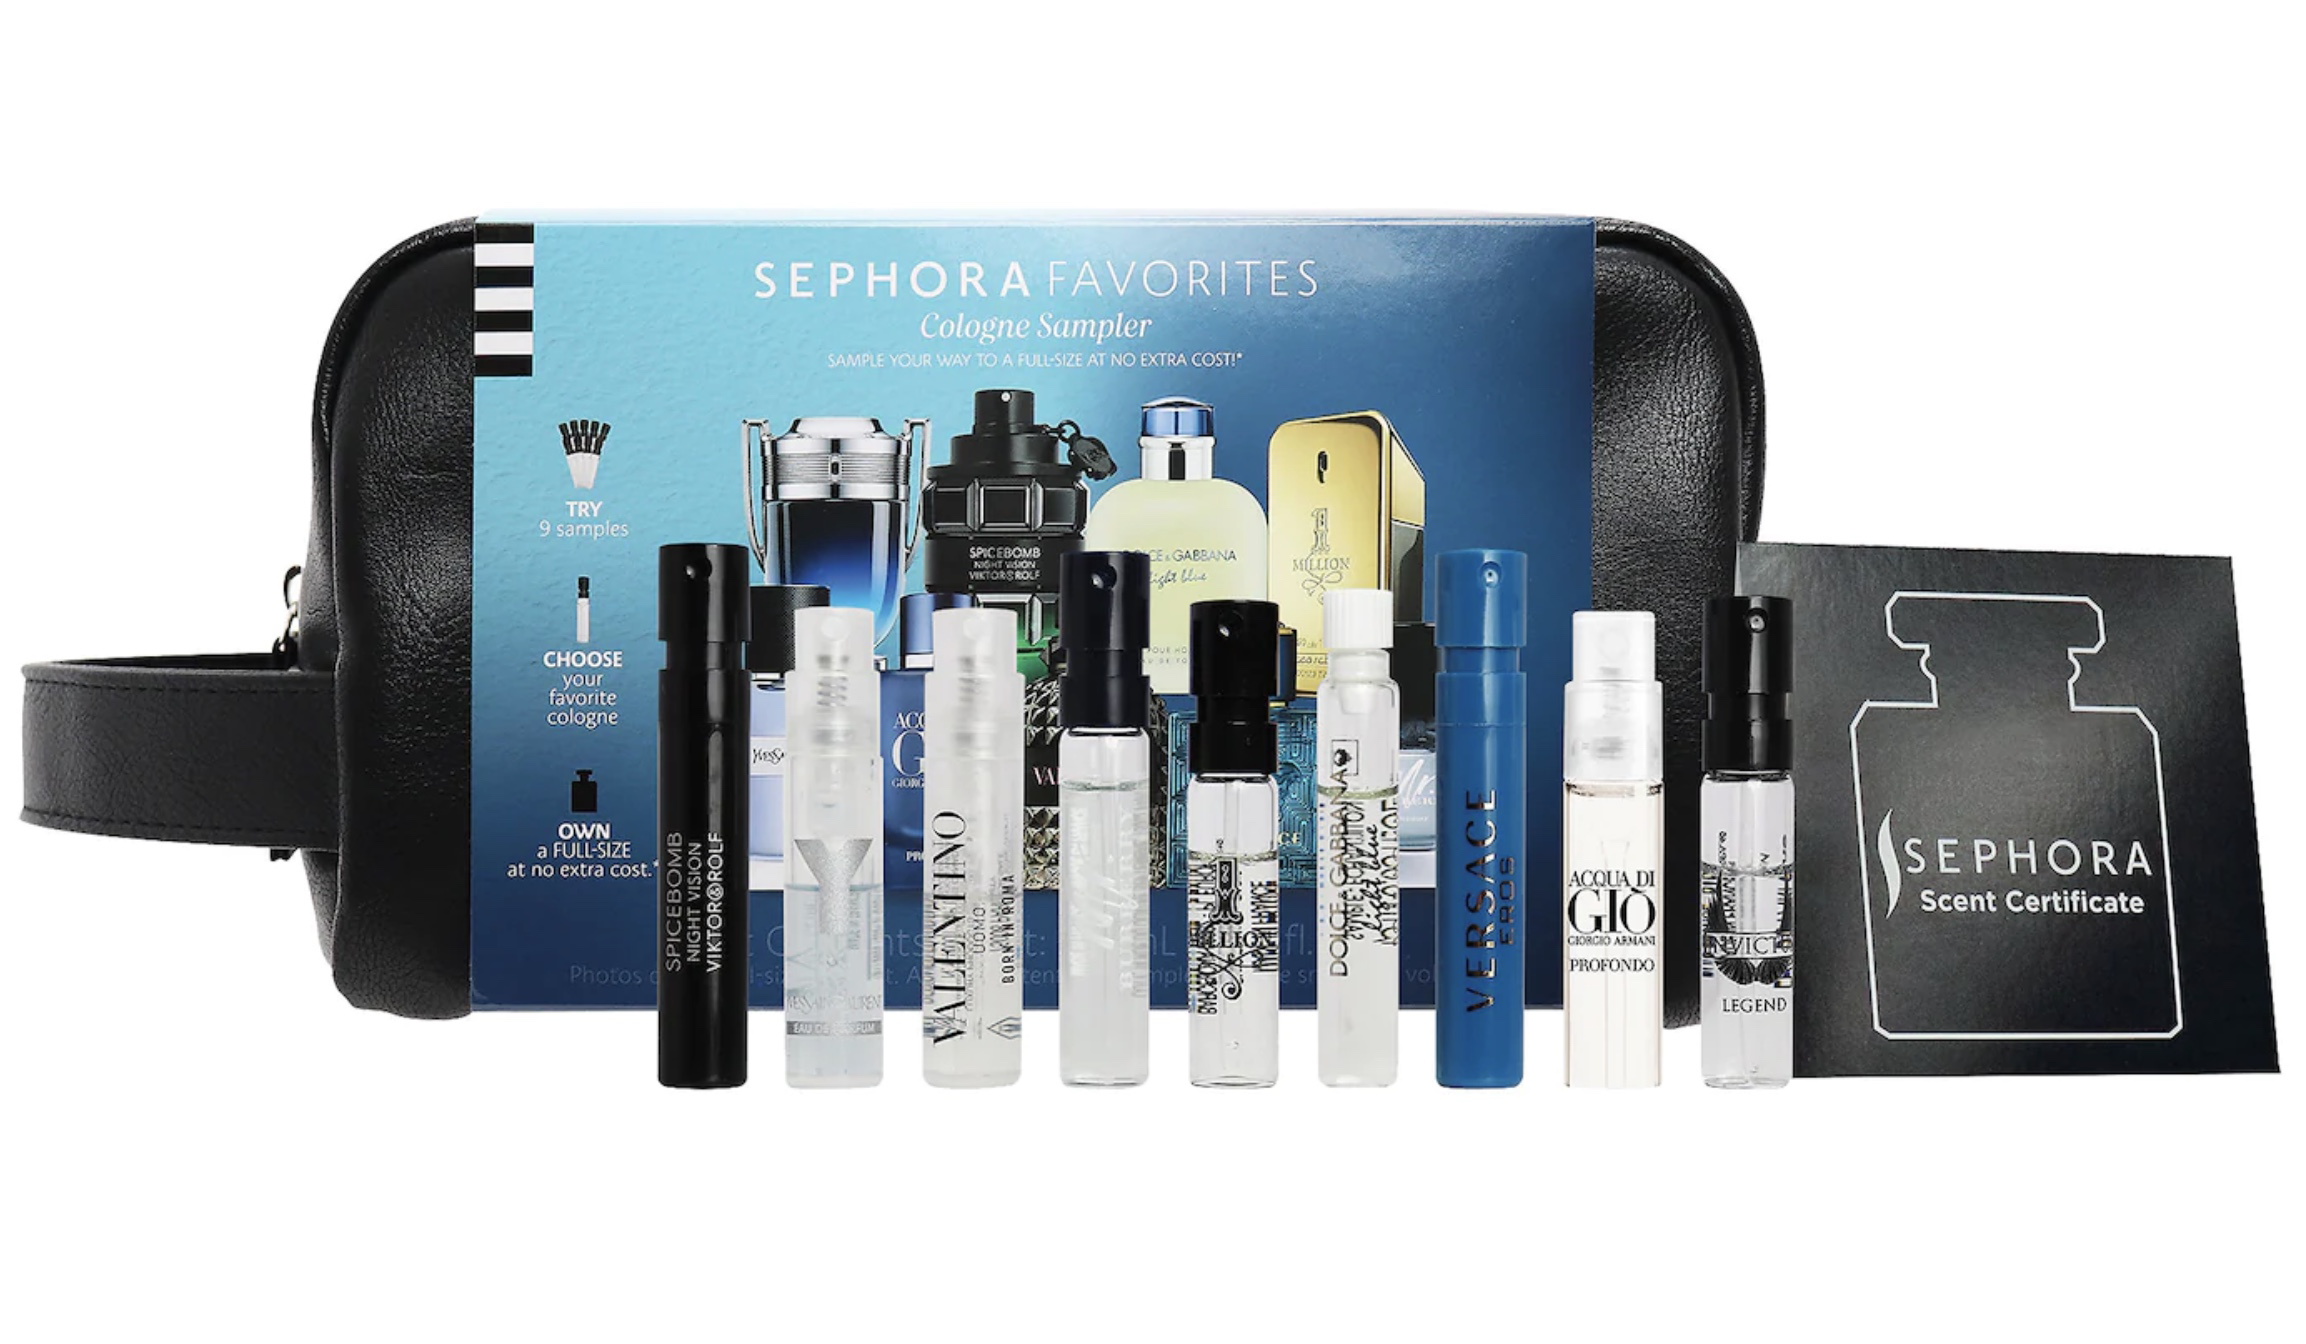 New Sephora Men s Cologne Sampler Kit Available Now   Coupons Hello